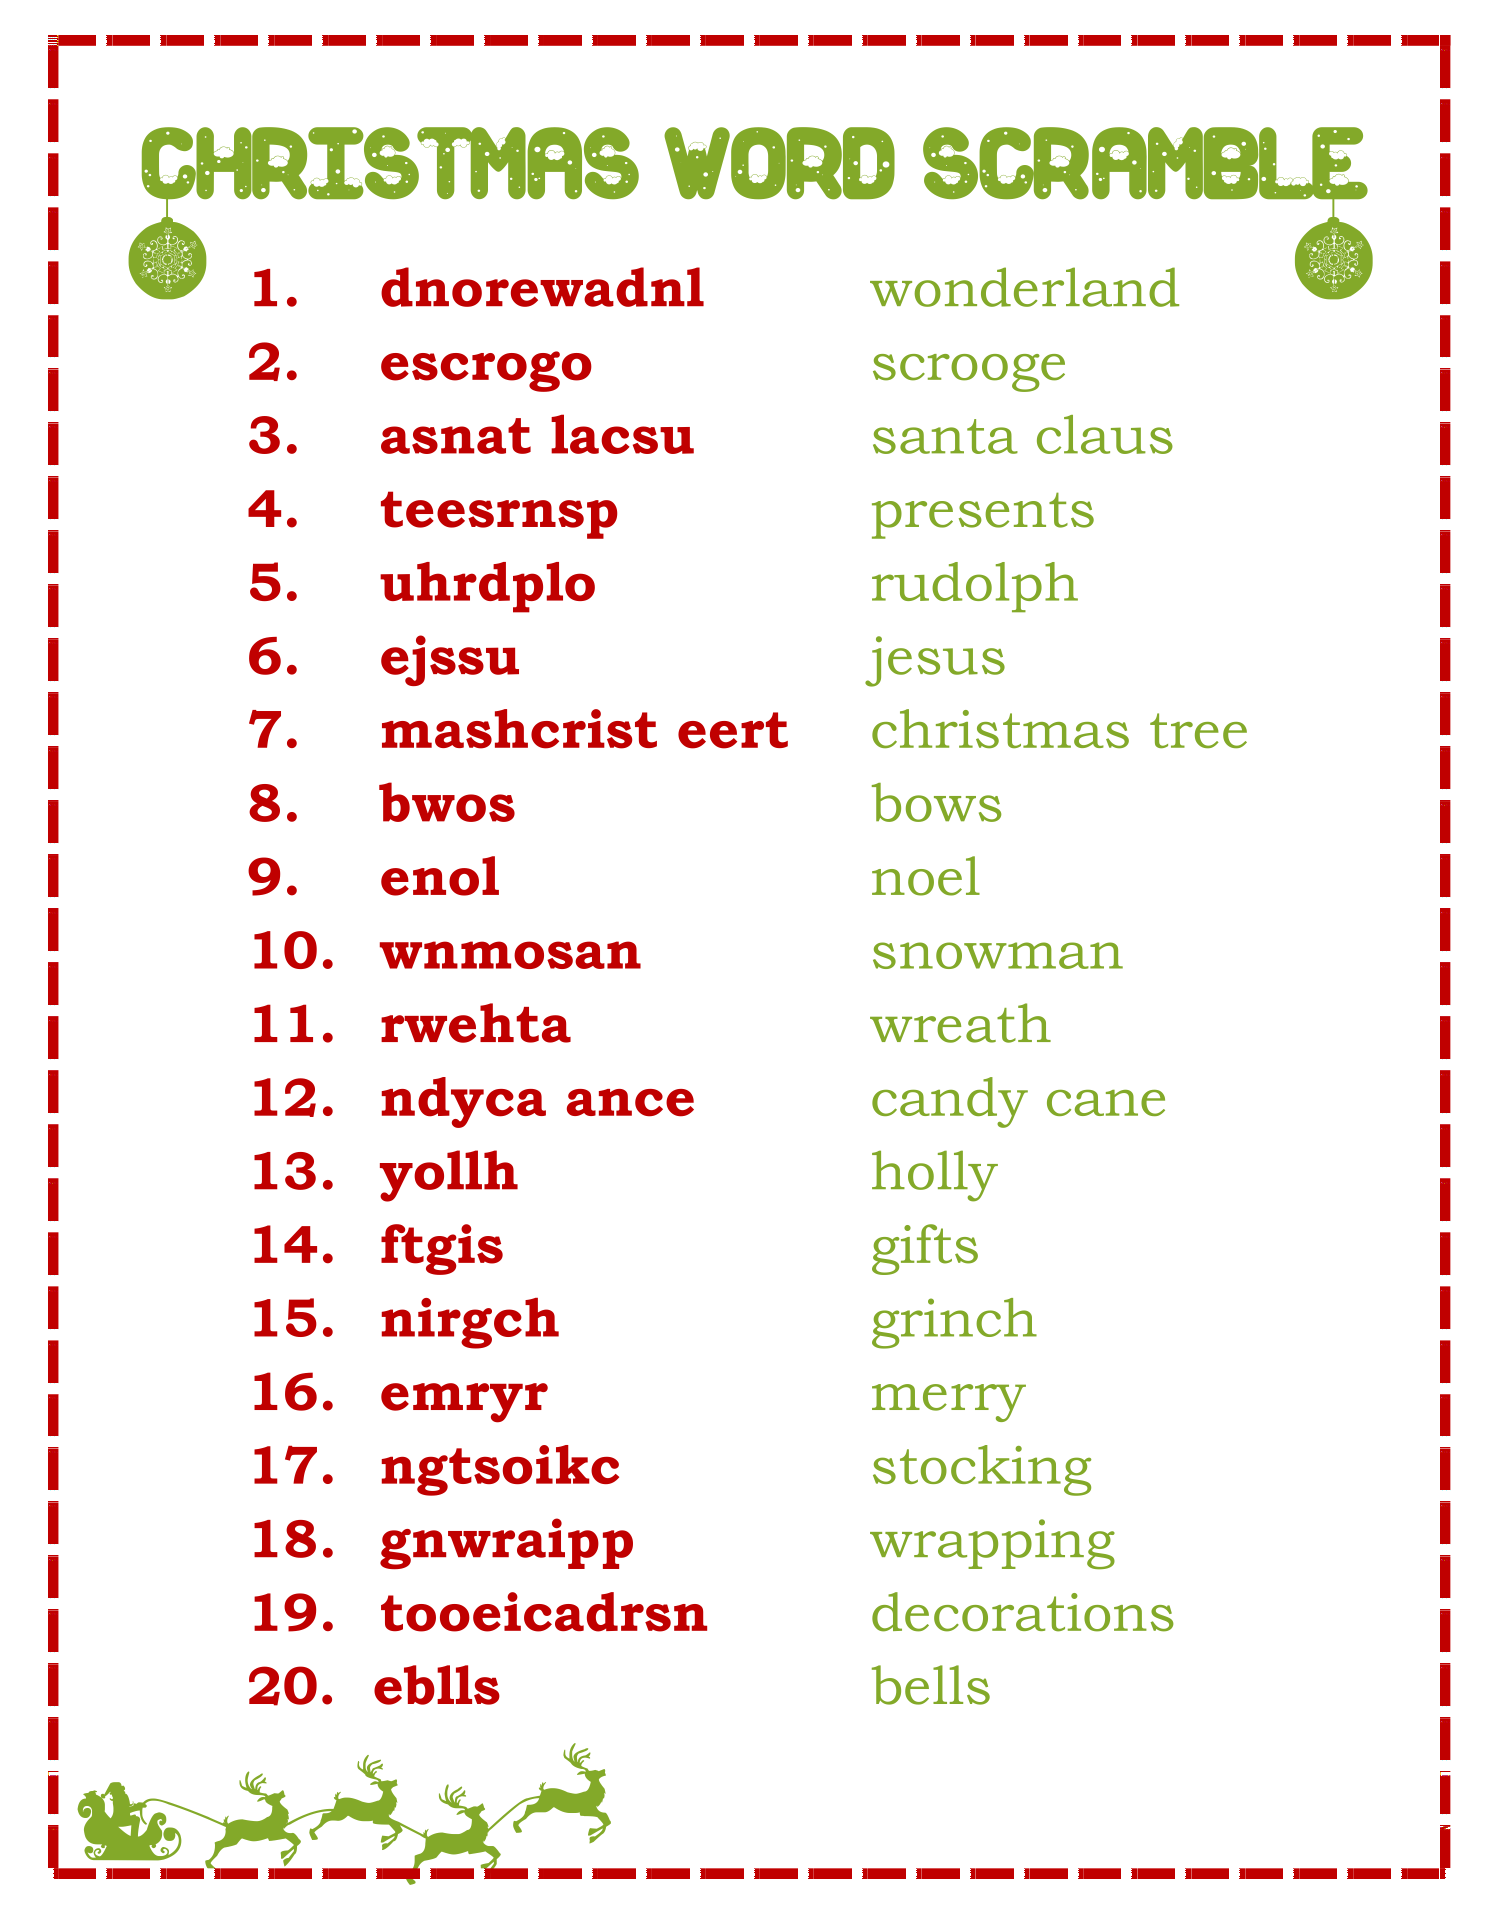 Christmas Word Scramble and Answers